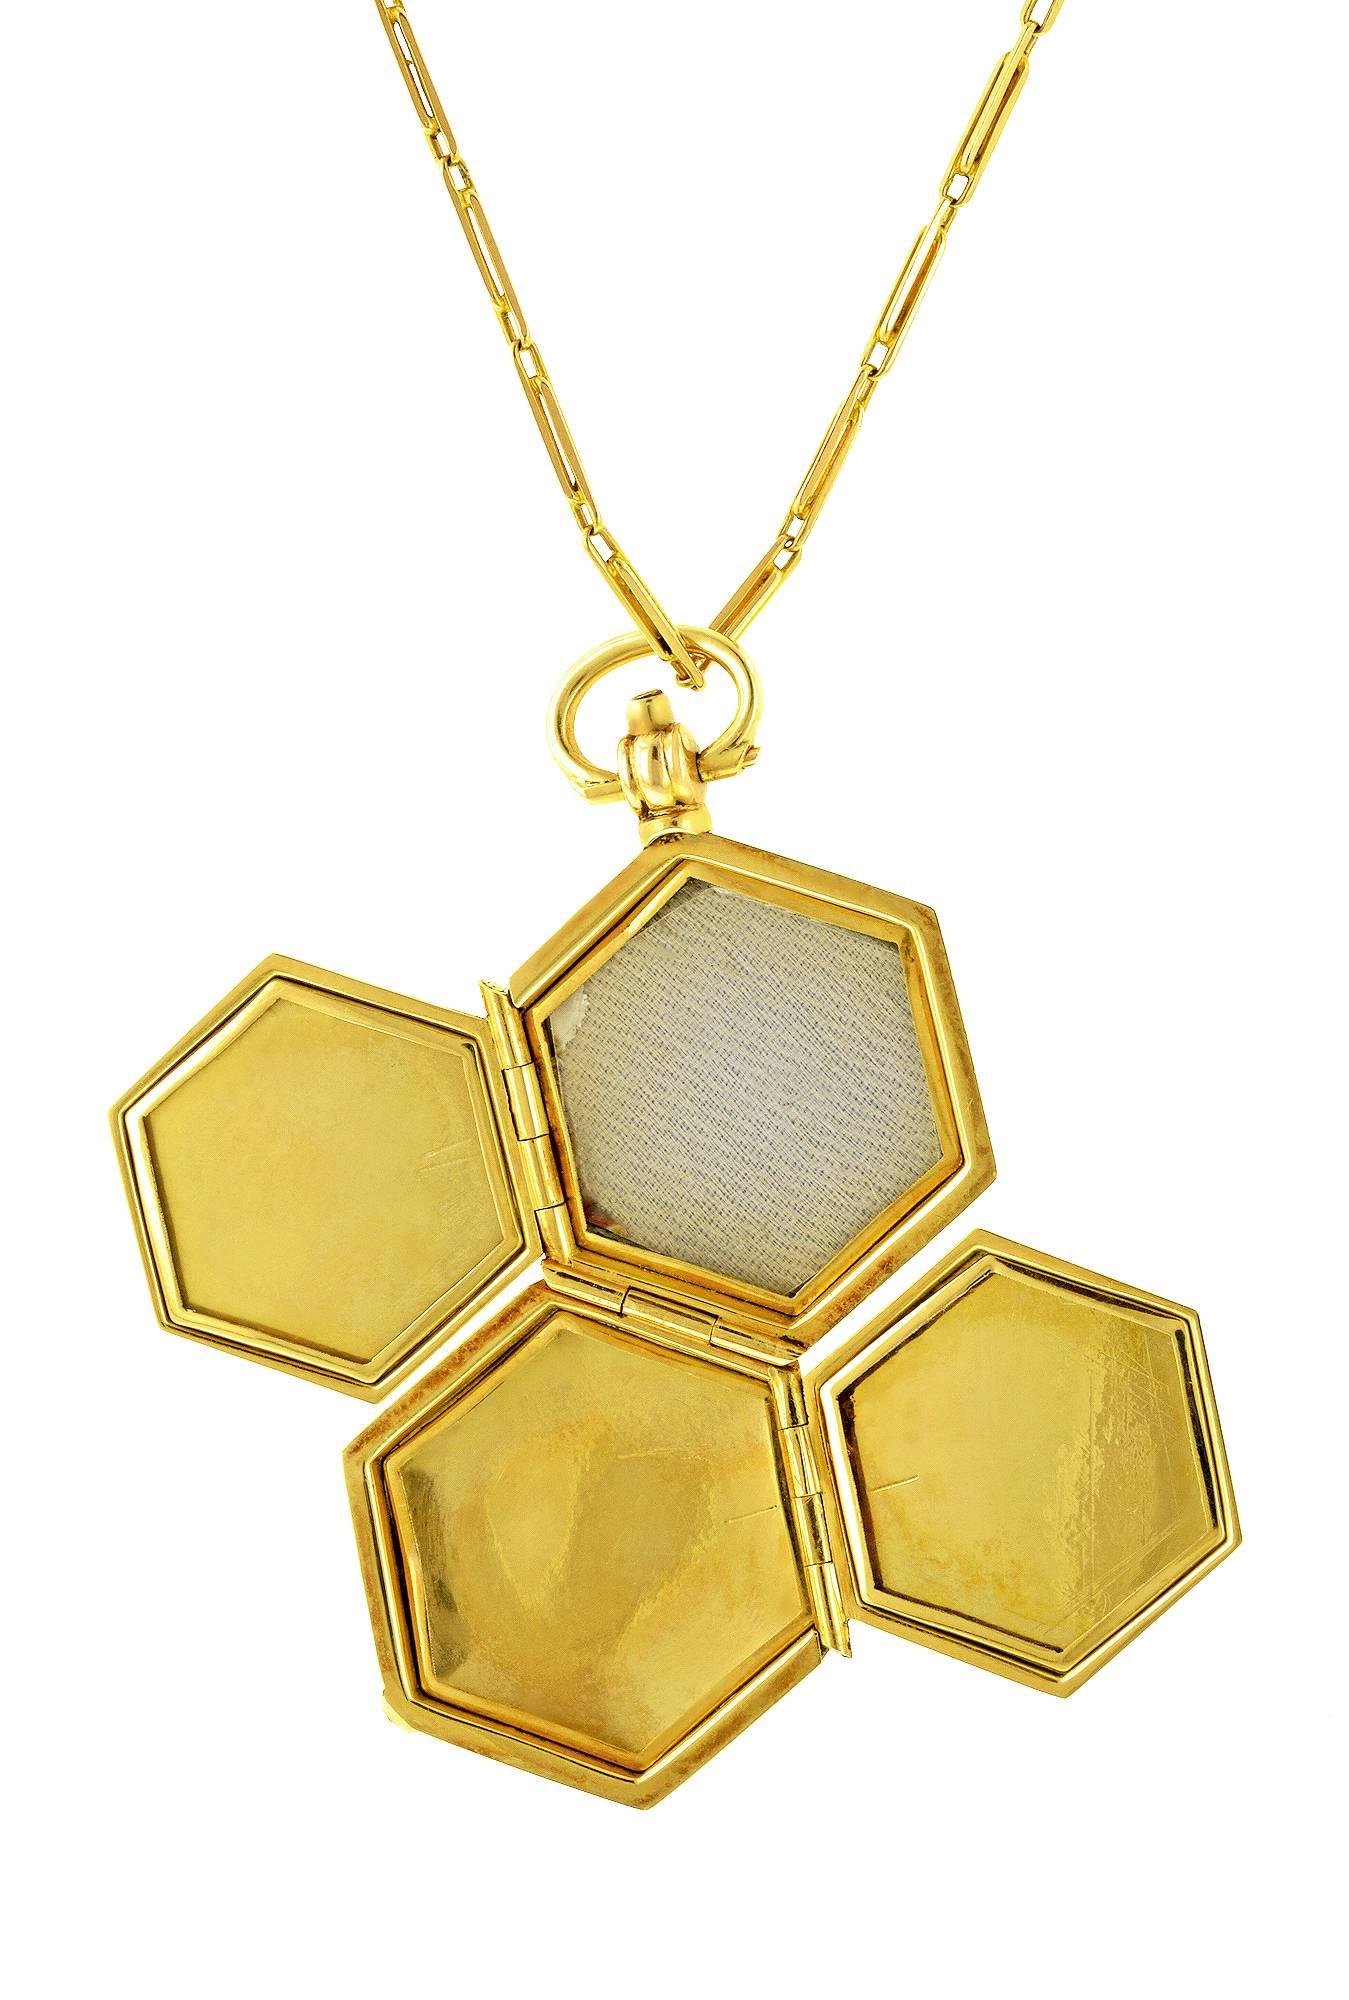 Hexagonal multipage locket necklace features a spring opening mechanism revealing four framed compartments for photos. Locket measures 7/8 inch in width. Fashioned in 15k yellow gold. Suspended from a 17.5 inch long, 15K yellow gold, fancy link bar